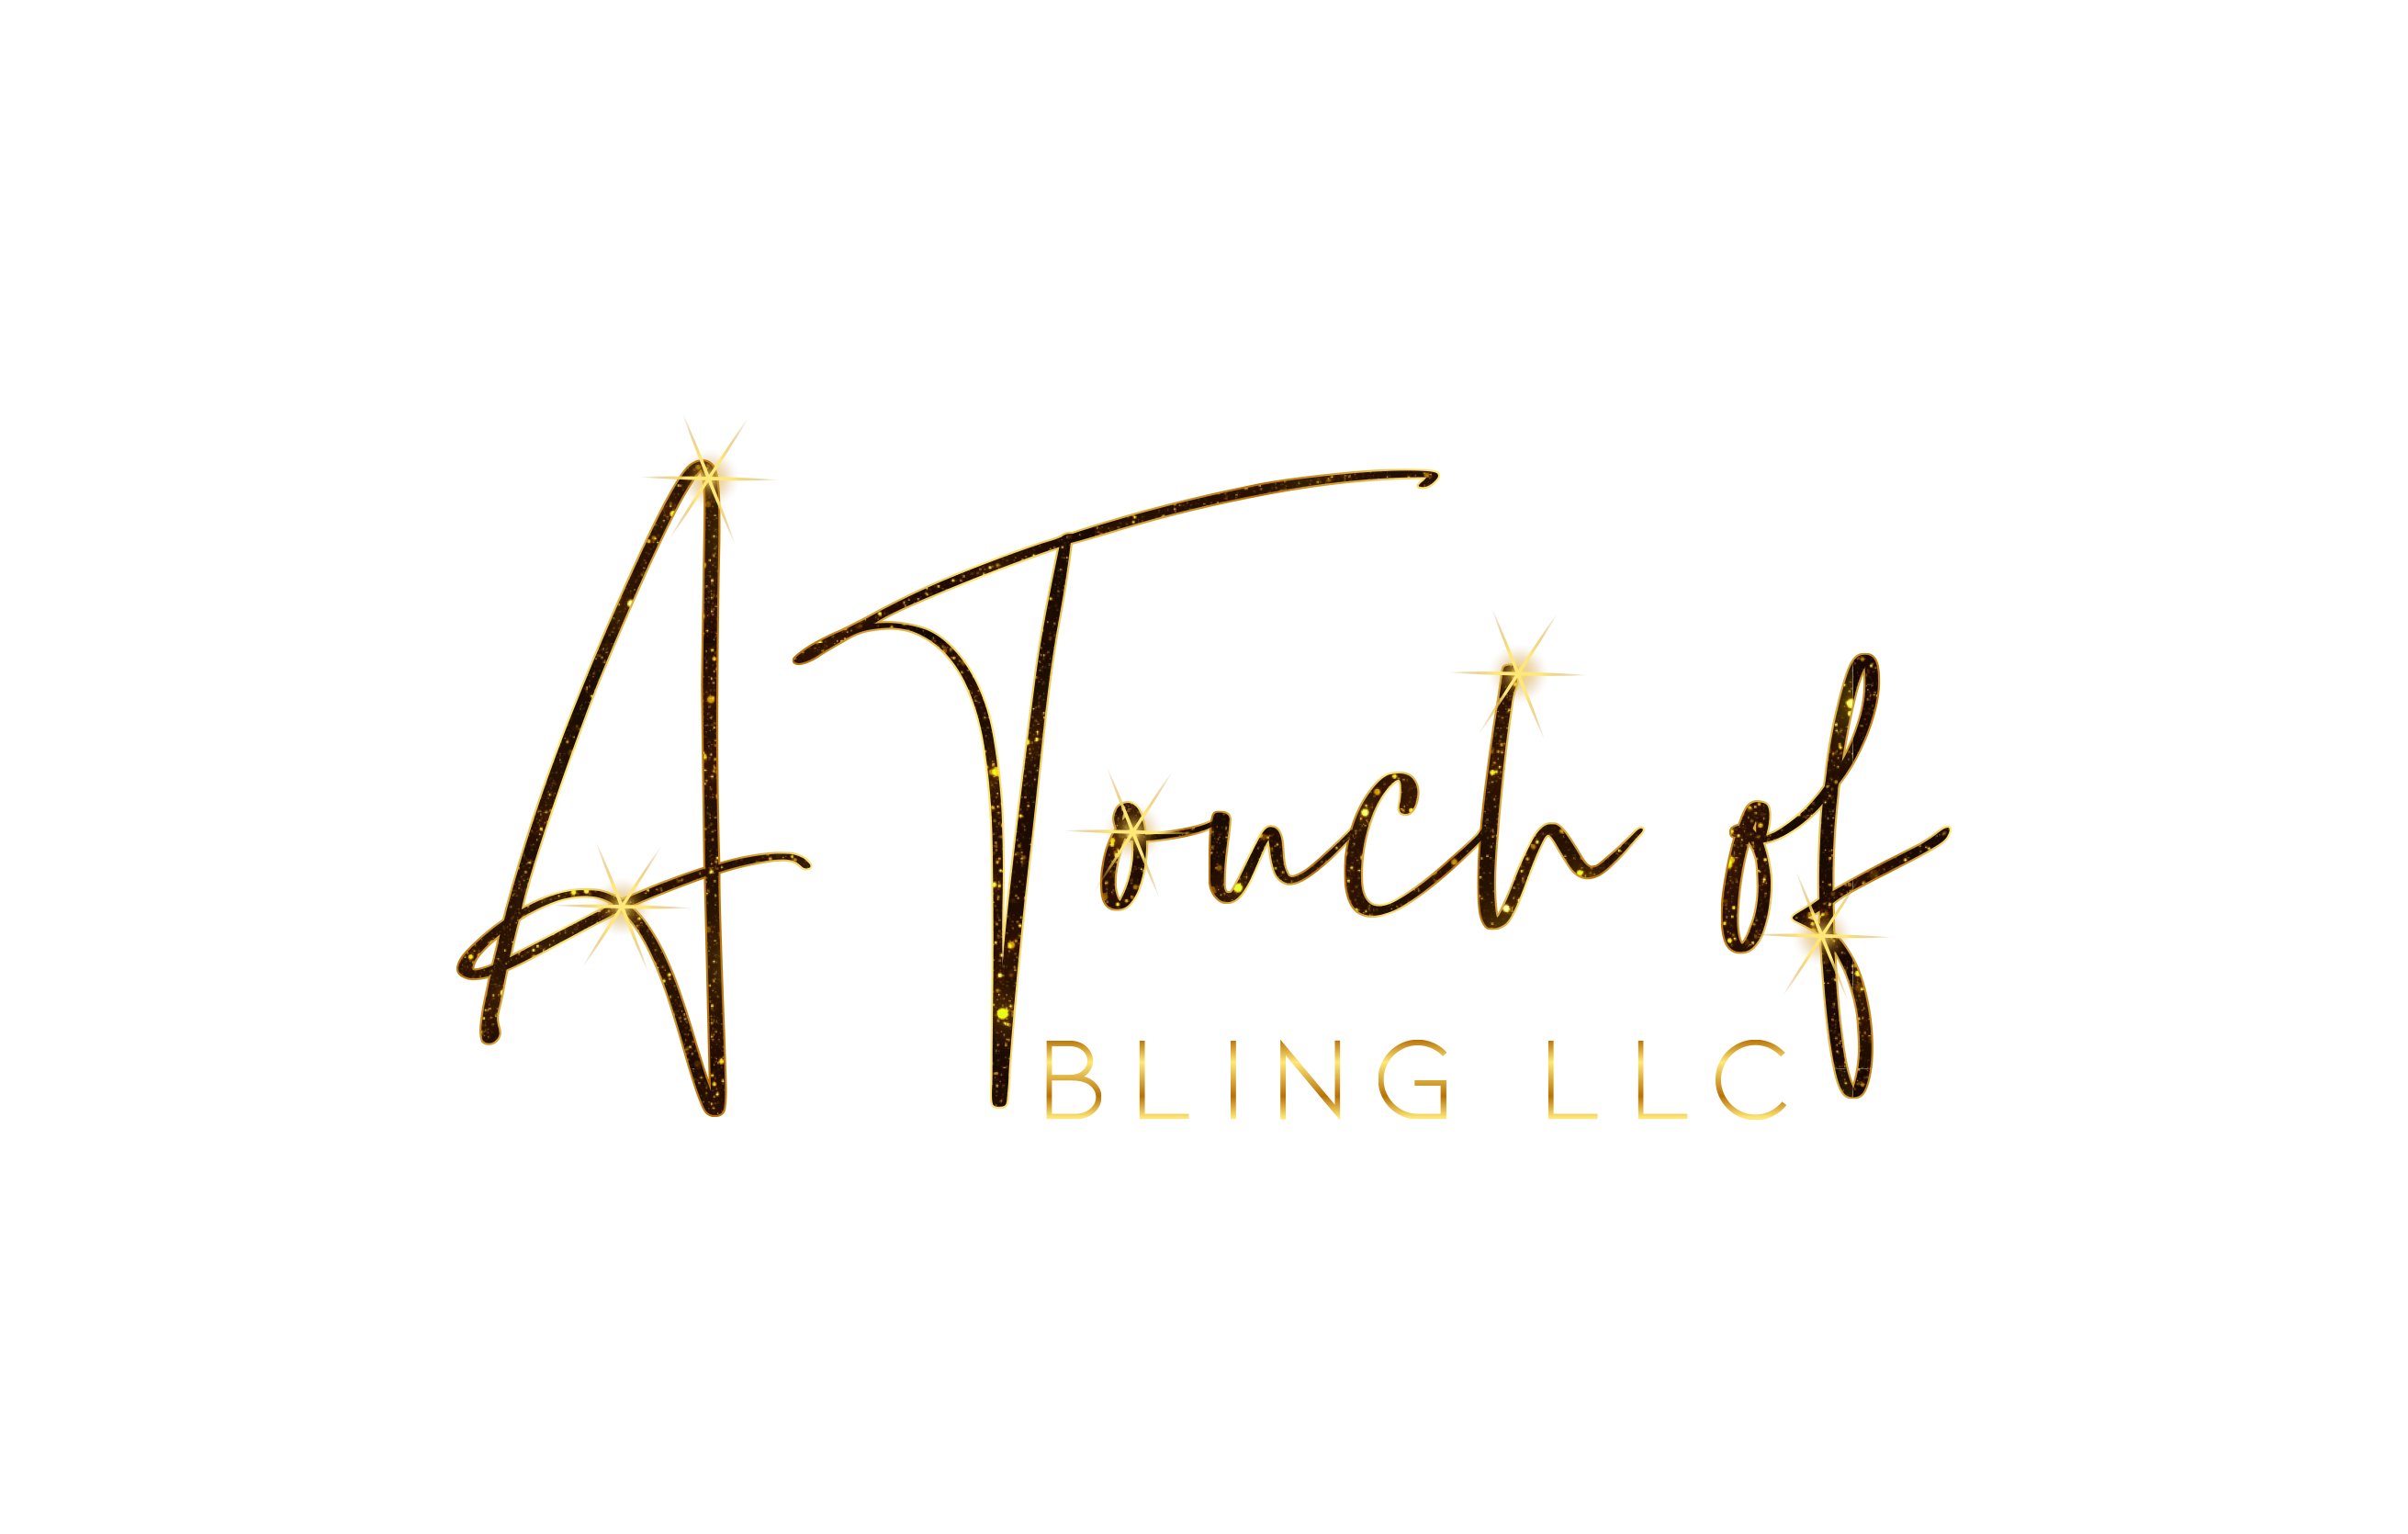 A Touch of Bling LLC